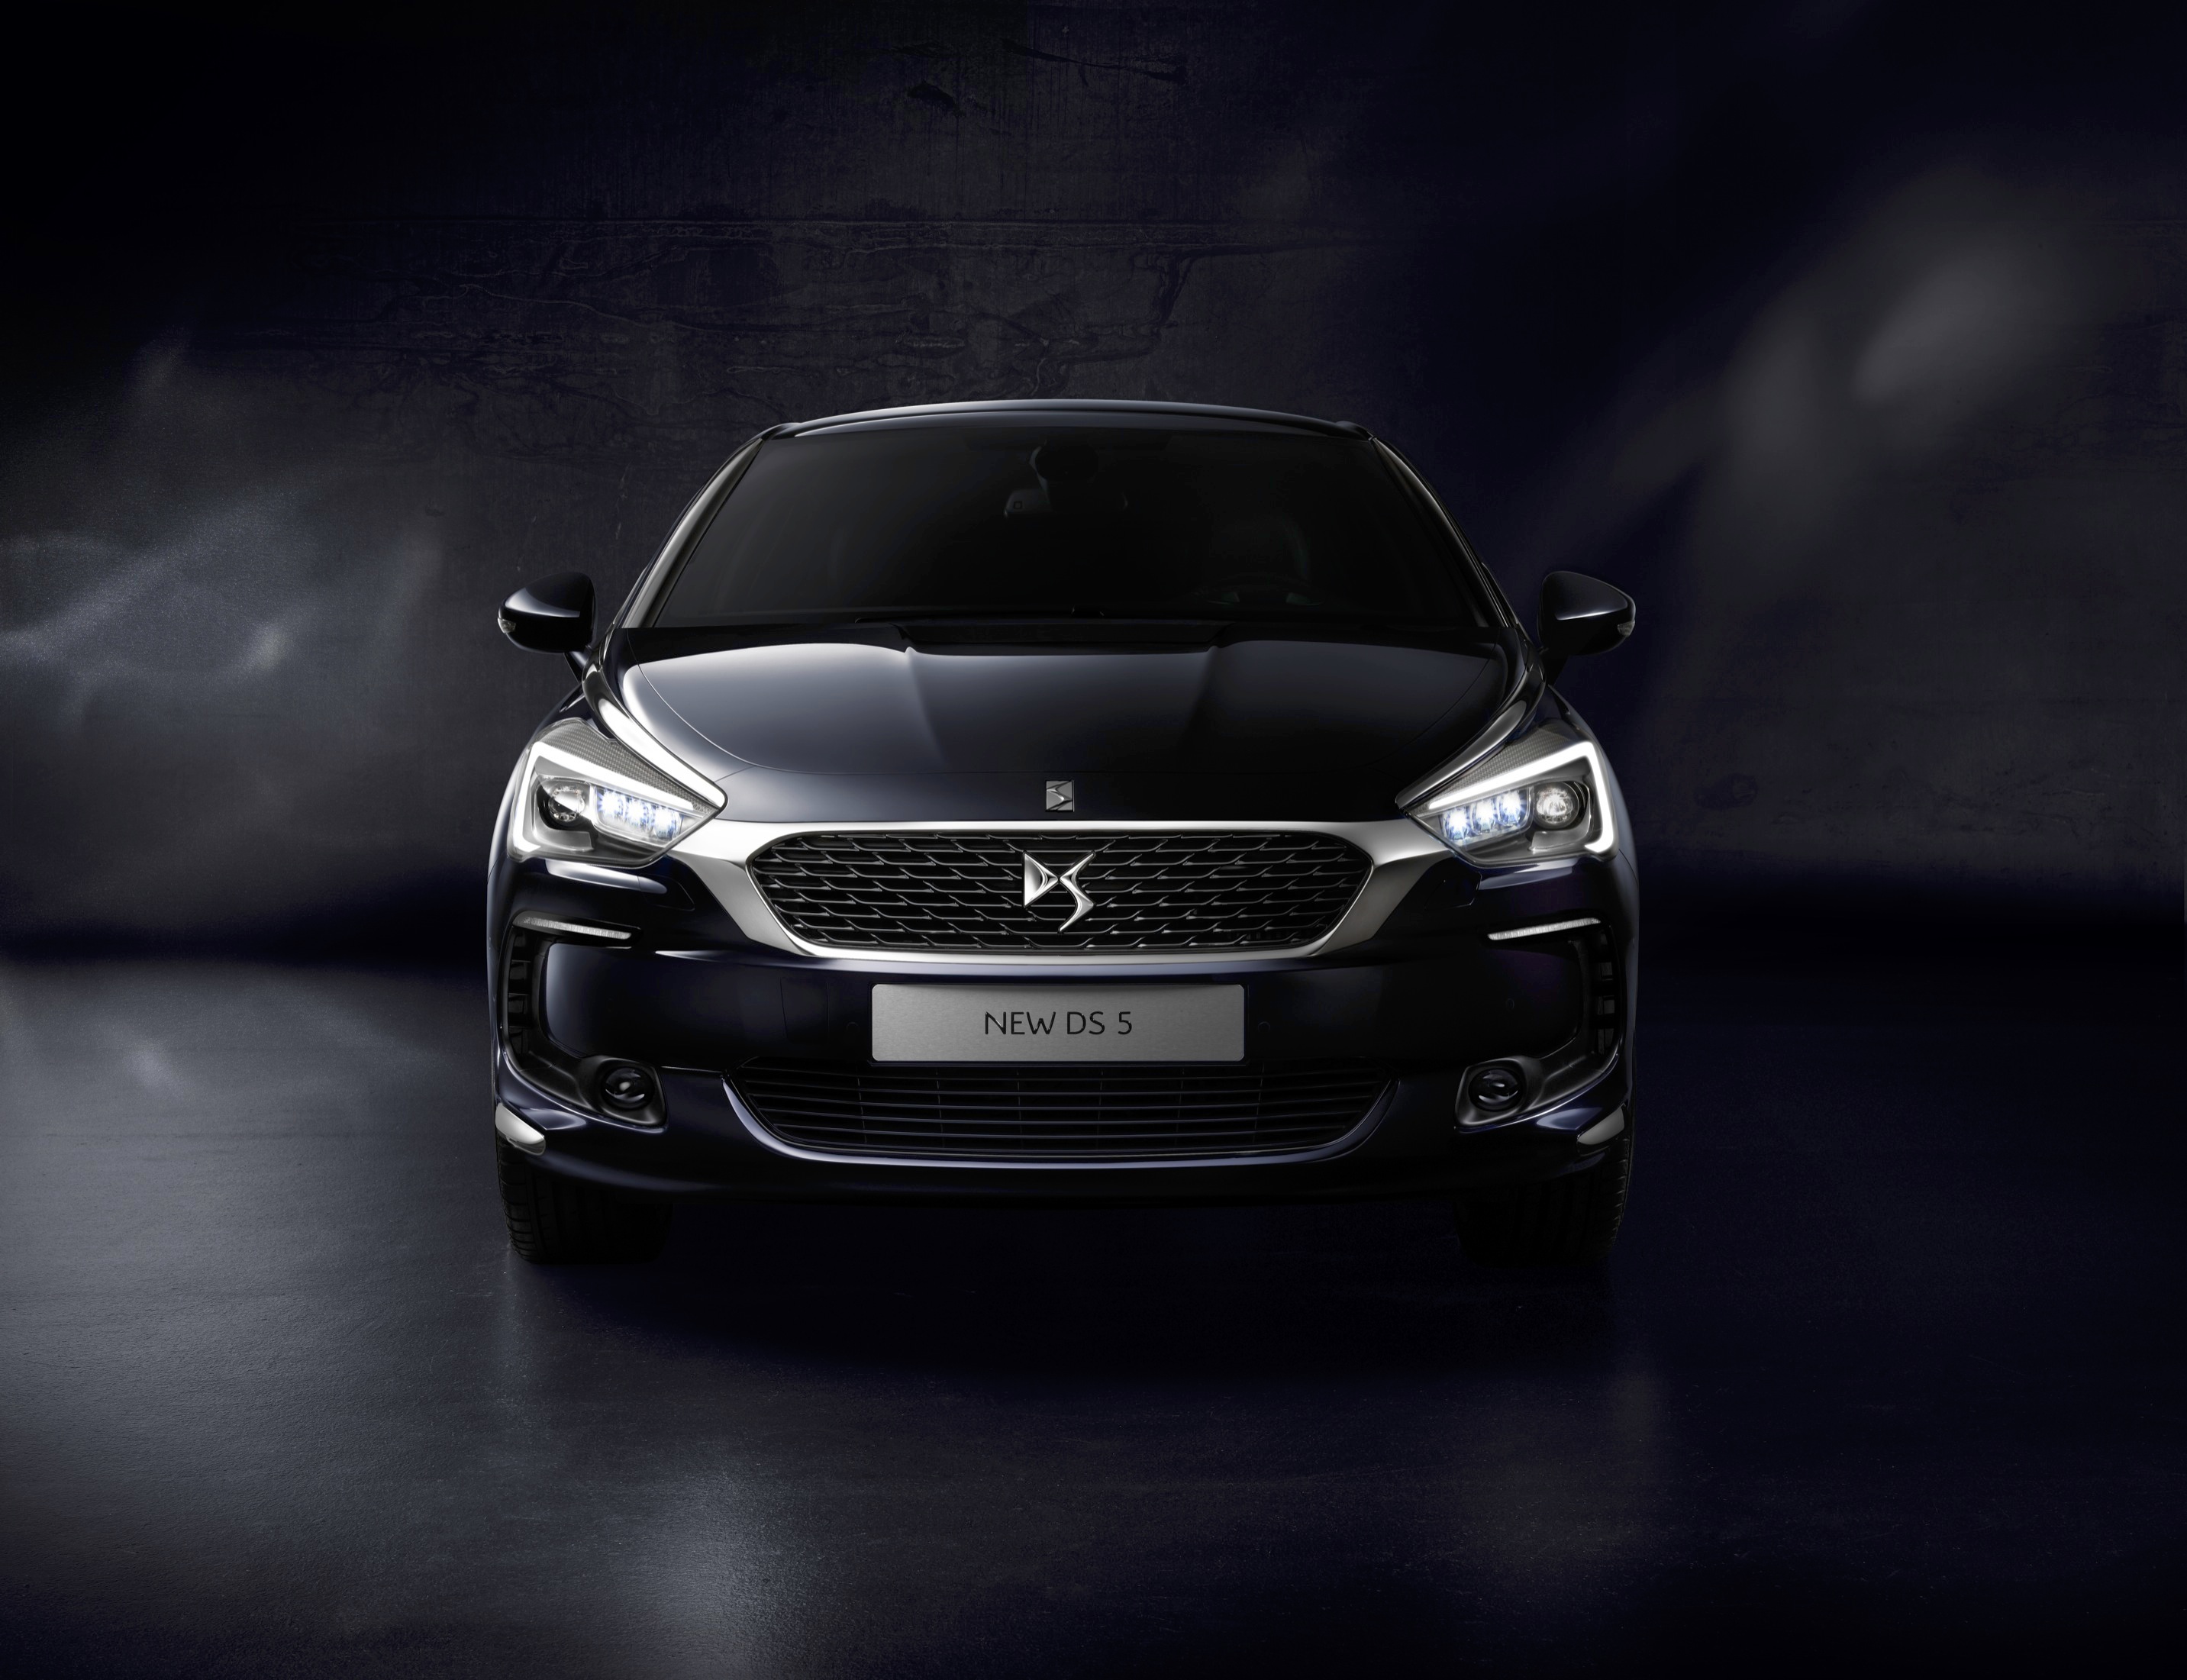 Avis UK unlocks unforgettable driving experiences with the new DS 5